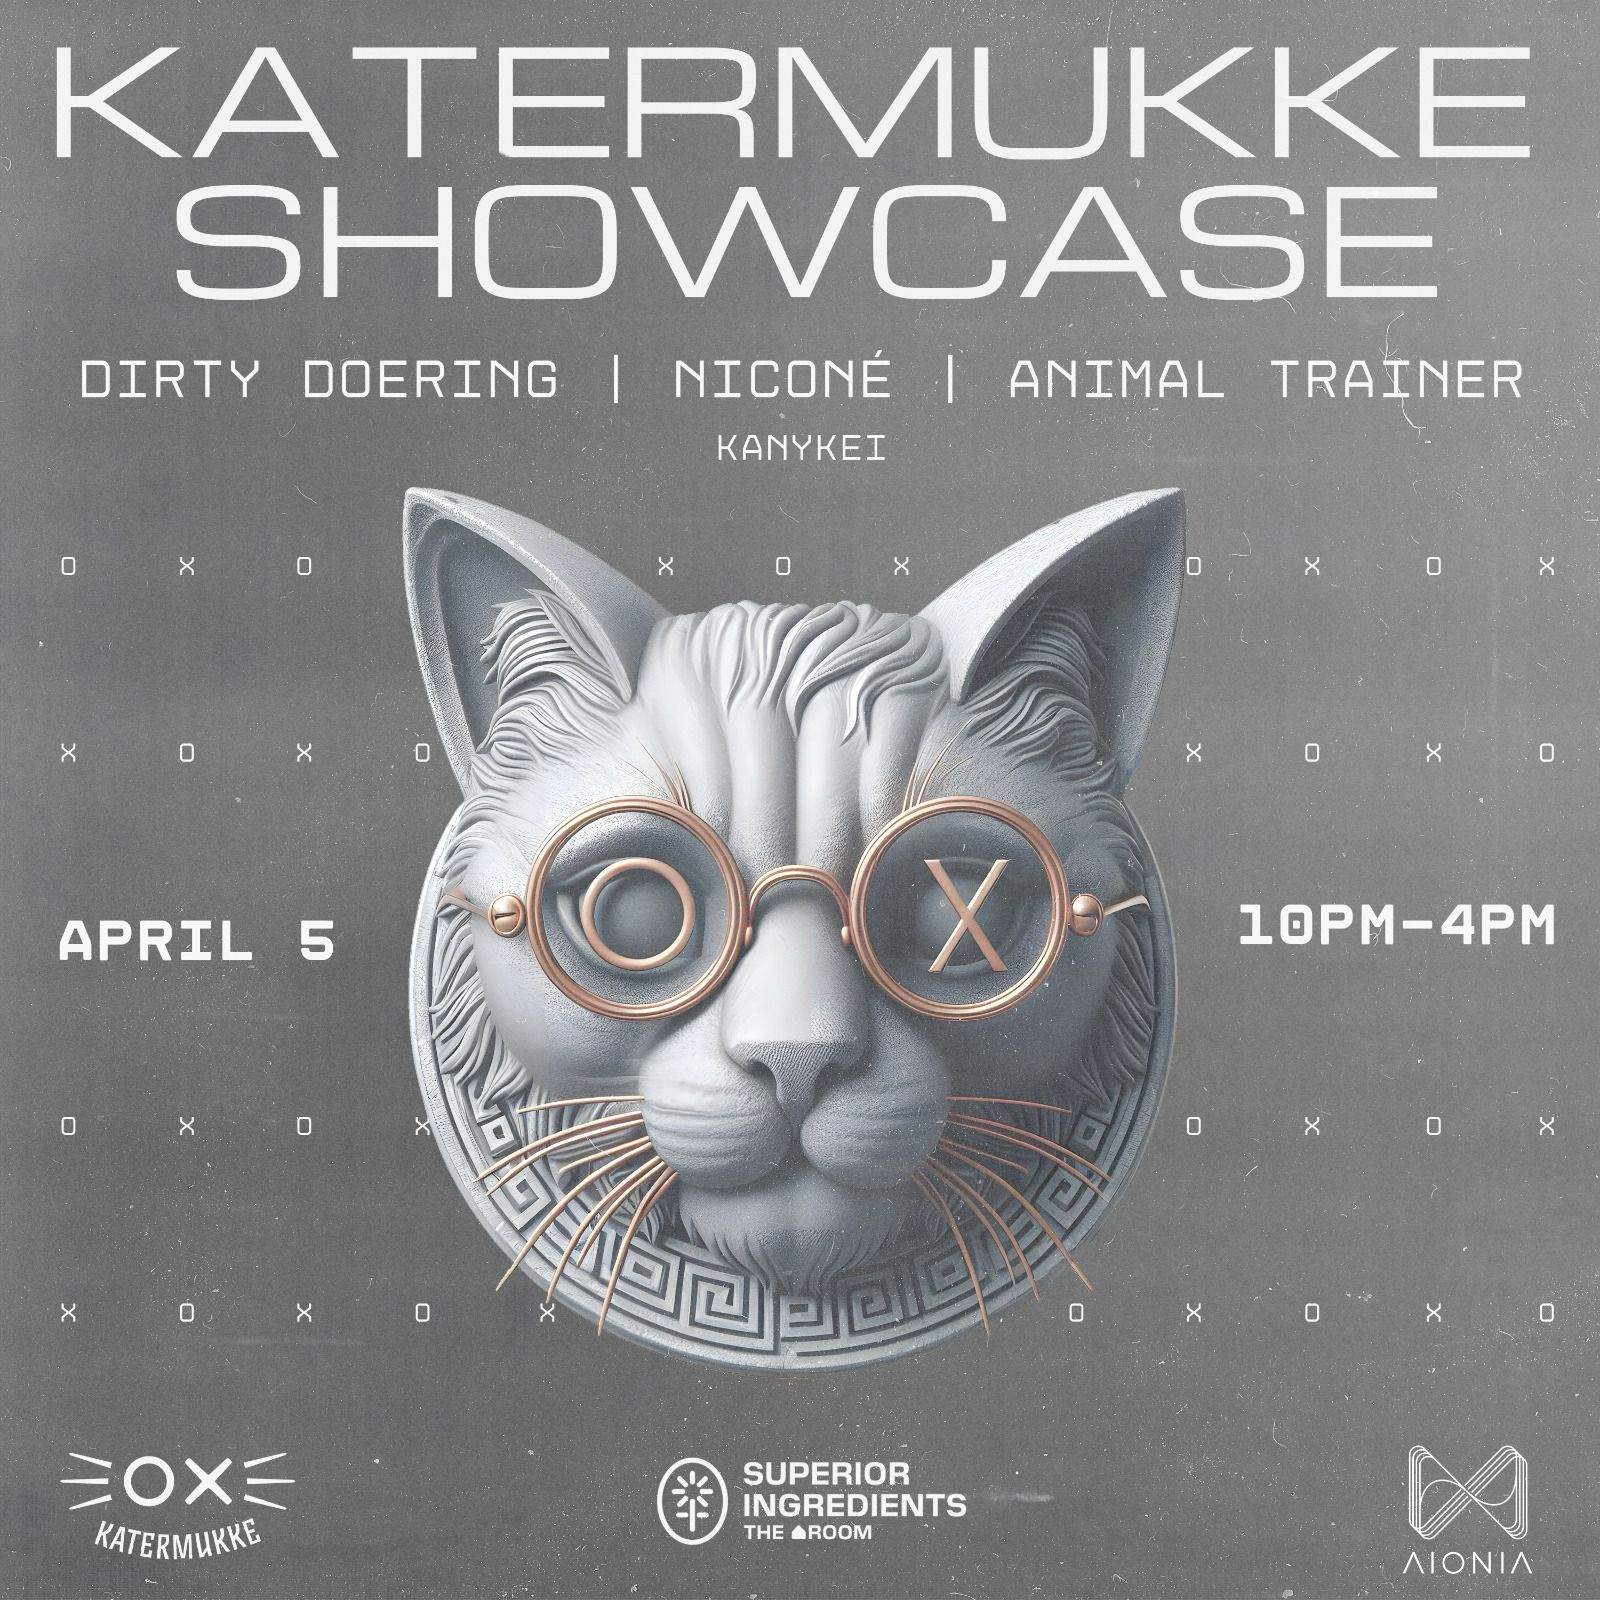 AIONIA: NYC Katermukke Showcase with Dirty Doering, Nicone, Animal Trainer **TICKETS ===>> DICE** - フライヤー裏